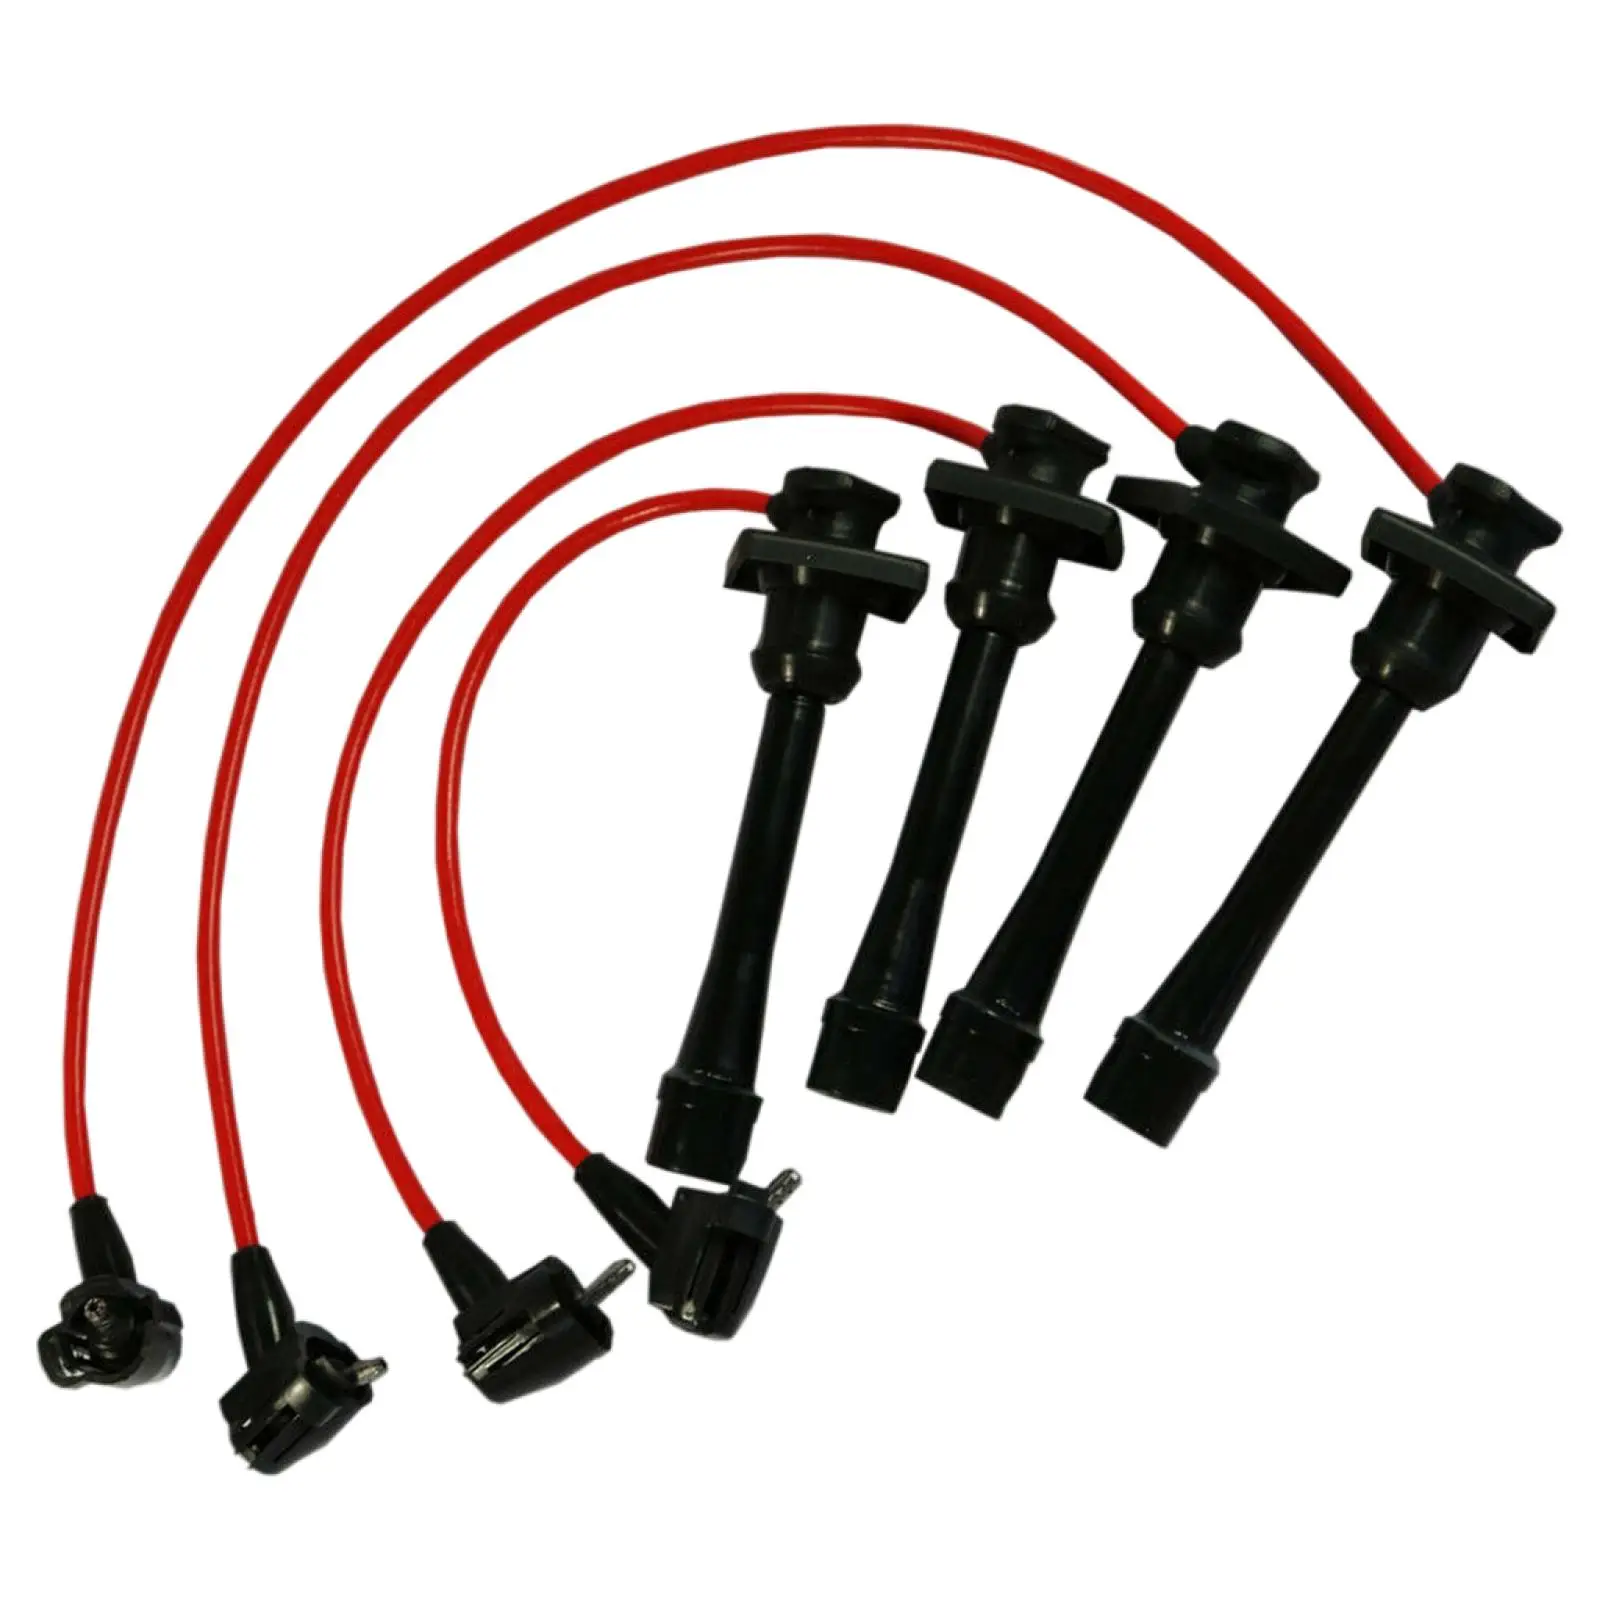 4Pcs Spark Plug Wires Set 90919-22327 Silicone Ignition Cable for toyota 1993 1994 1995 1996 1997 1.8L 93-97